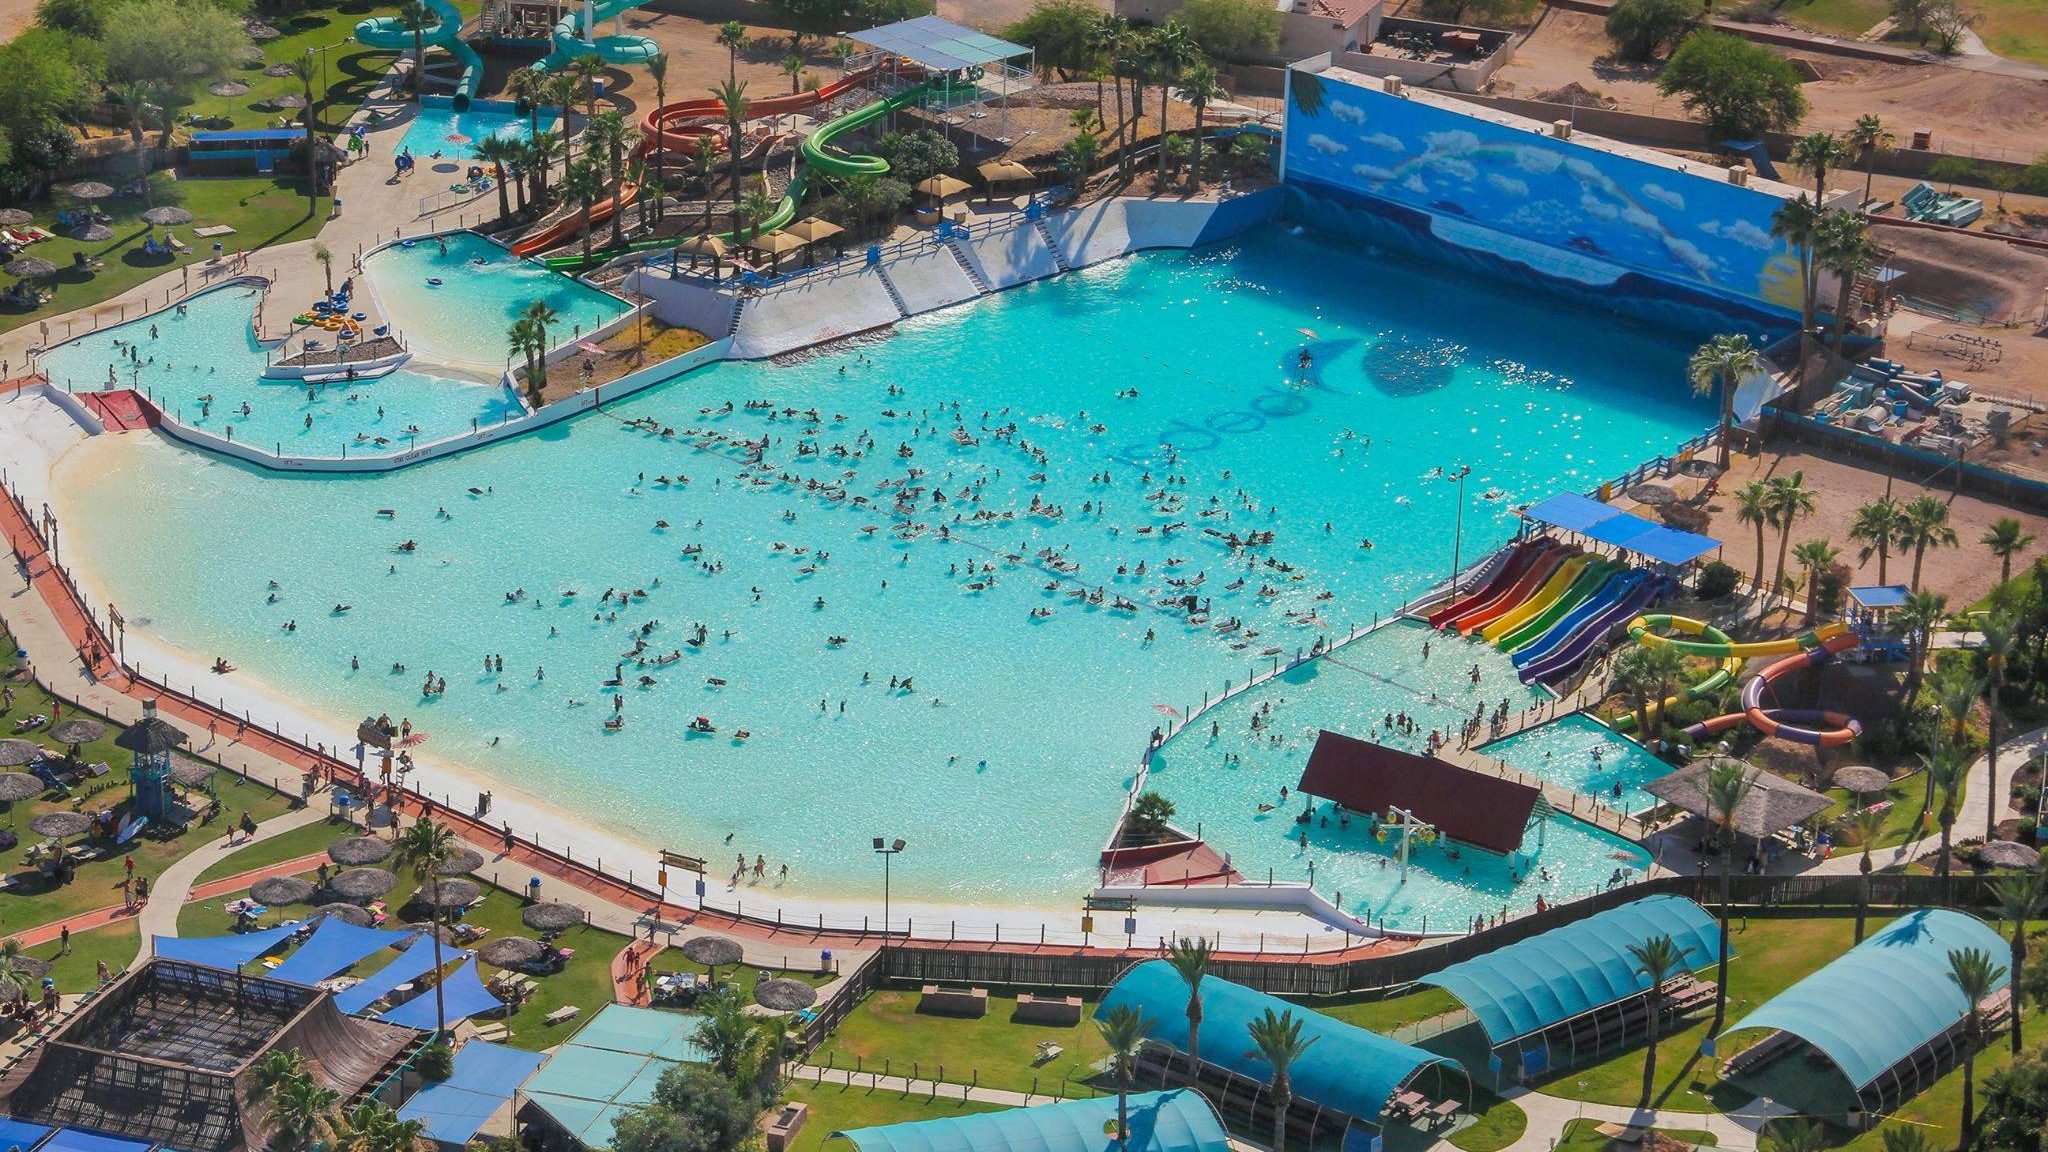 Big Surf in Tempe, closed since 2019 due to COVID, sold for more than $49M